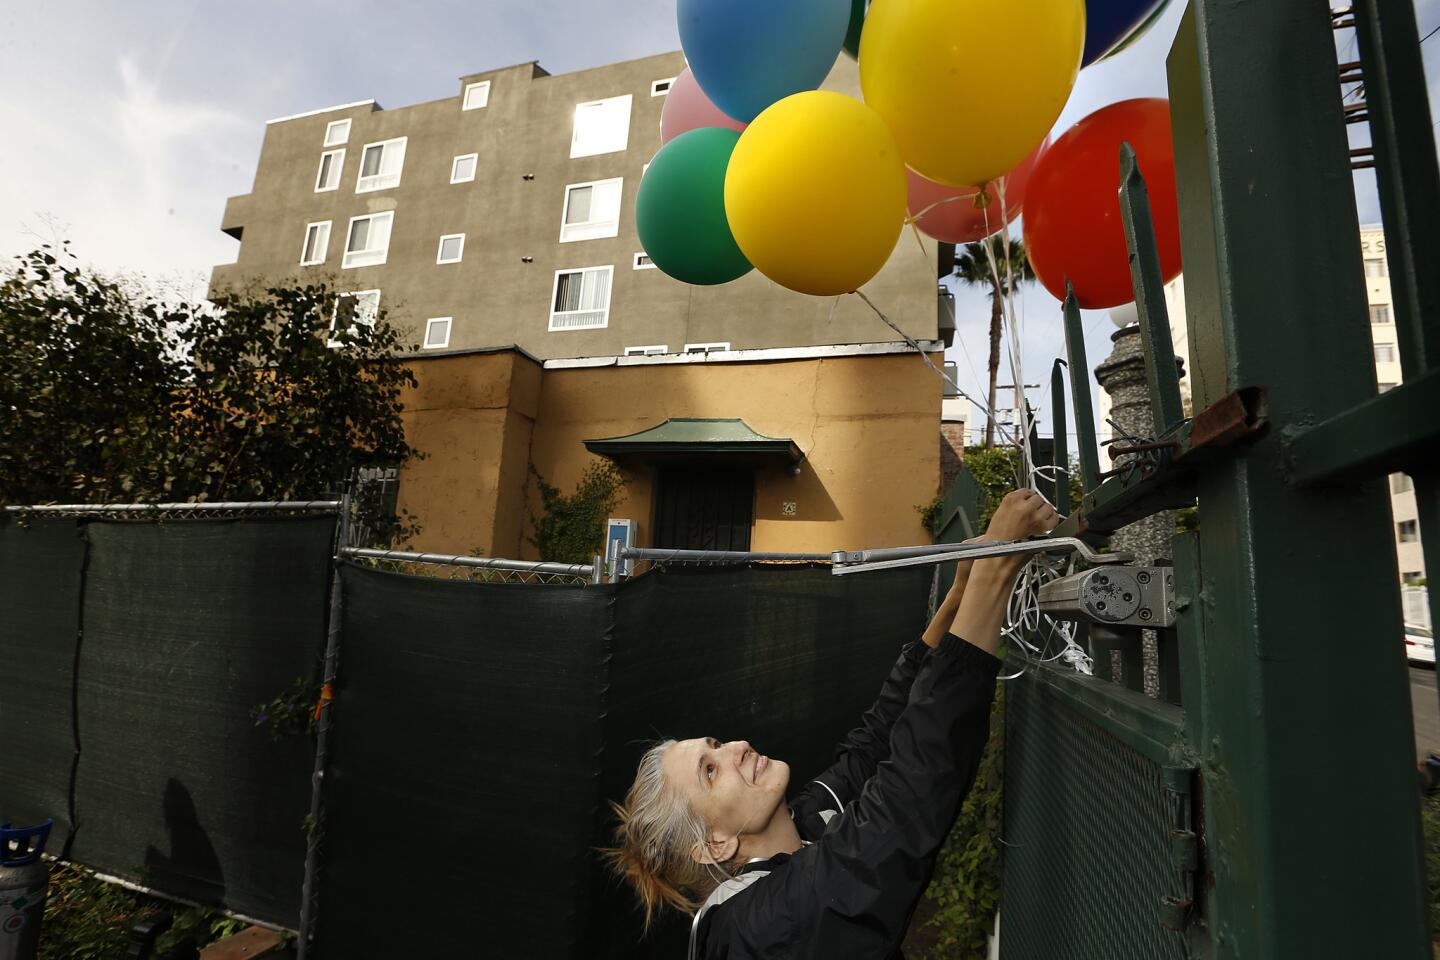 Artist Anne Hars has been placing balloons at several locations around Los Angeles in a symbolic gesture against small-lot developers who are pressuring tenants to move to make way for more pricey townhomes. The use of balloons to try to illuminate the issue, Hars said, was inspired by the animated film "Up" - the story an elderly resident who refuses to leave his home and uses balloons to put it in flight.